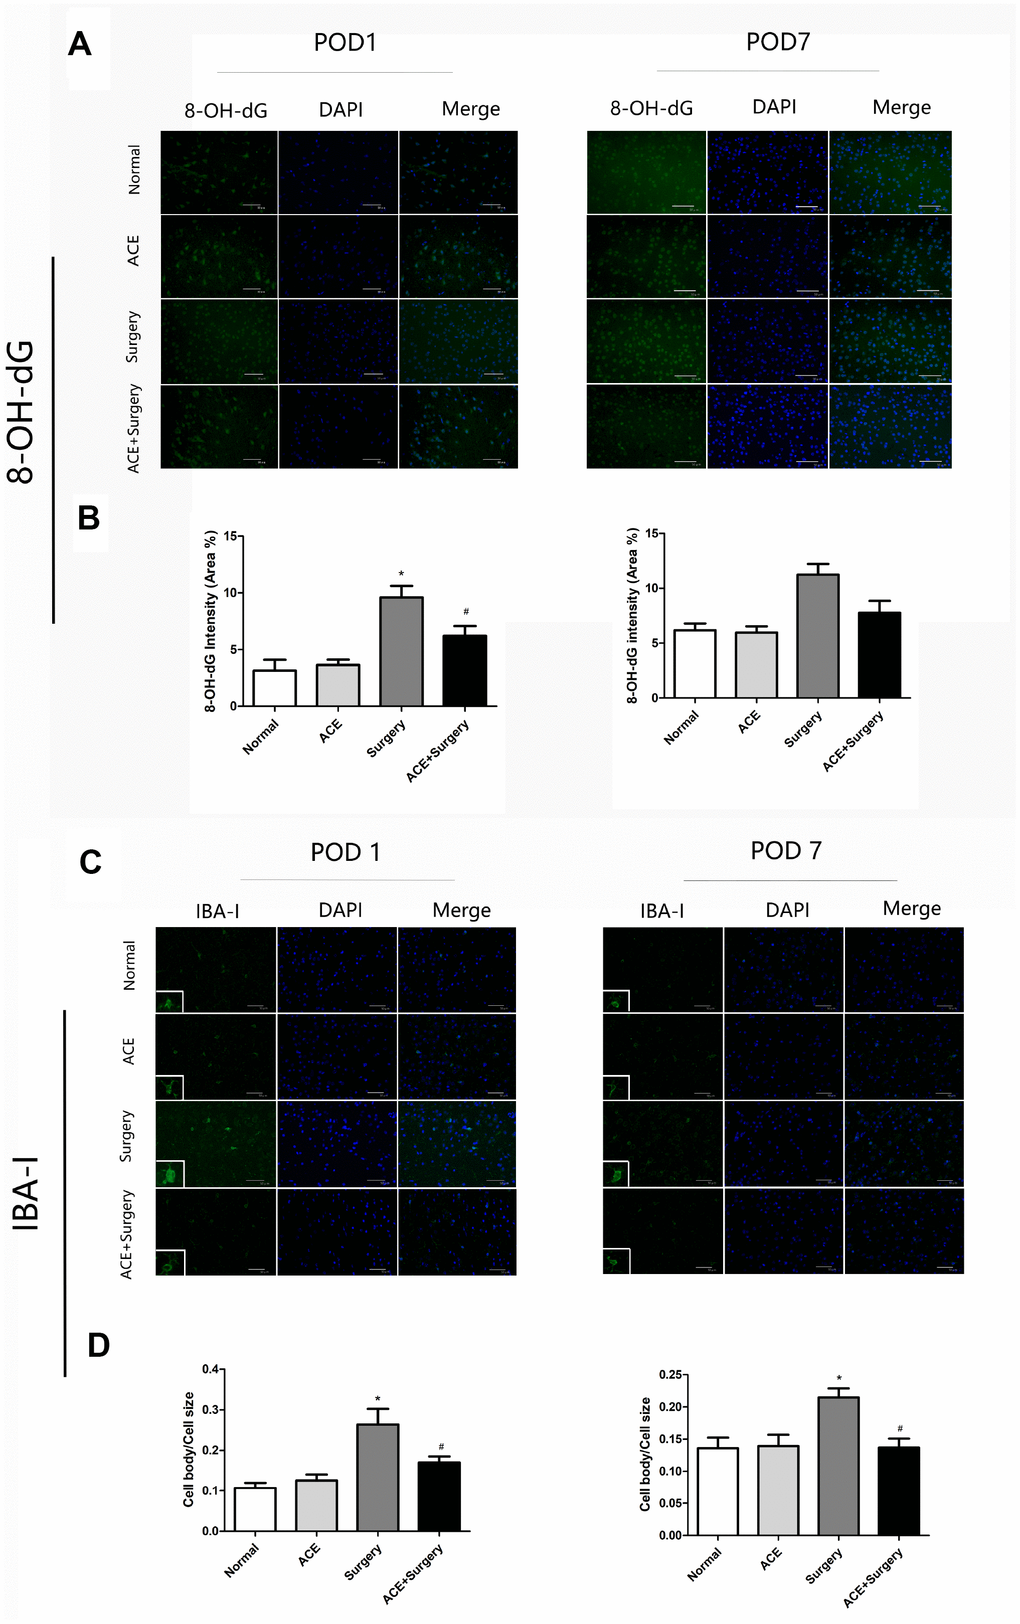 Surgery-induced ROS overproduction and IBA-1 activation in the hippocampus were suppressed by acetate administration (n=5). (A) Green fluorescence indicates 8-OH-dG levels on POD 1 and POD 7. (B) Bar graphs display the quantification of 8-OH-dG in the hippocampus. (C) Representative images of IBA-1 expression on POD 1 and POD 7. (D) Bar graphs indicate the cell body/cell size of IBA-1-labeled microglia in the four groups. Data are expressed as the mean±SEM, *P